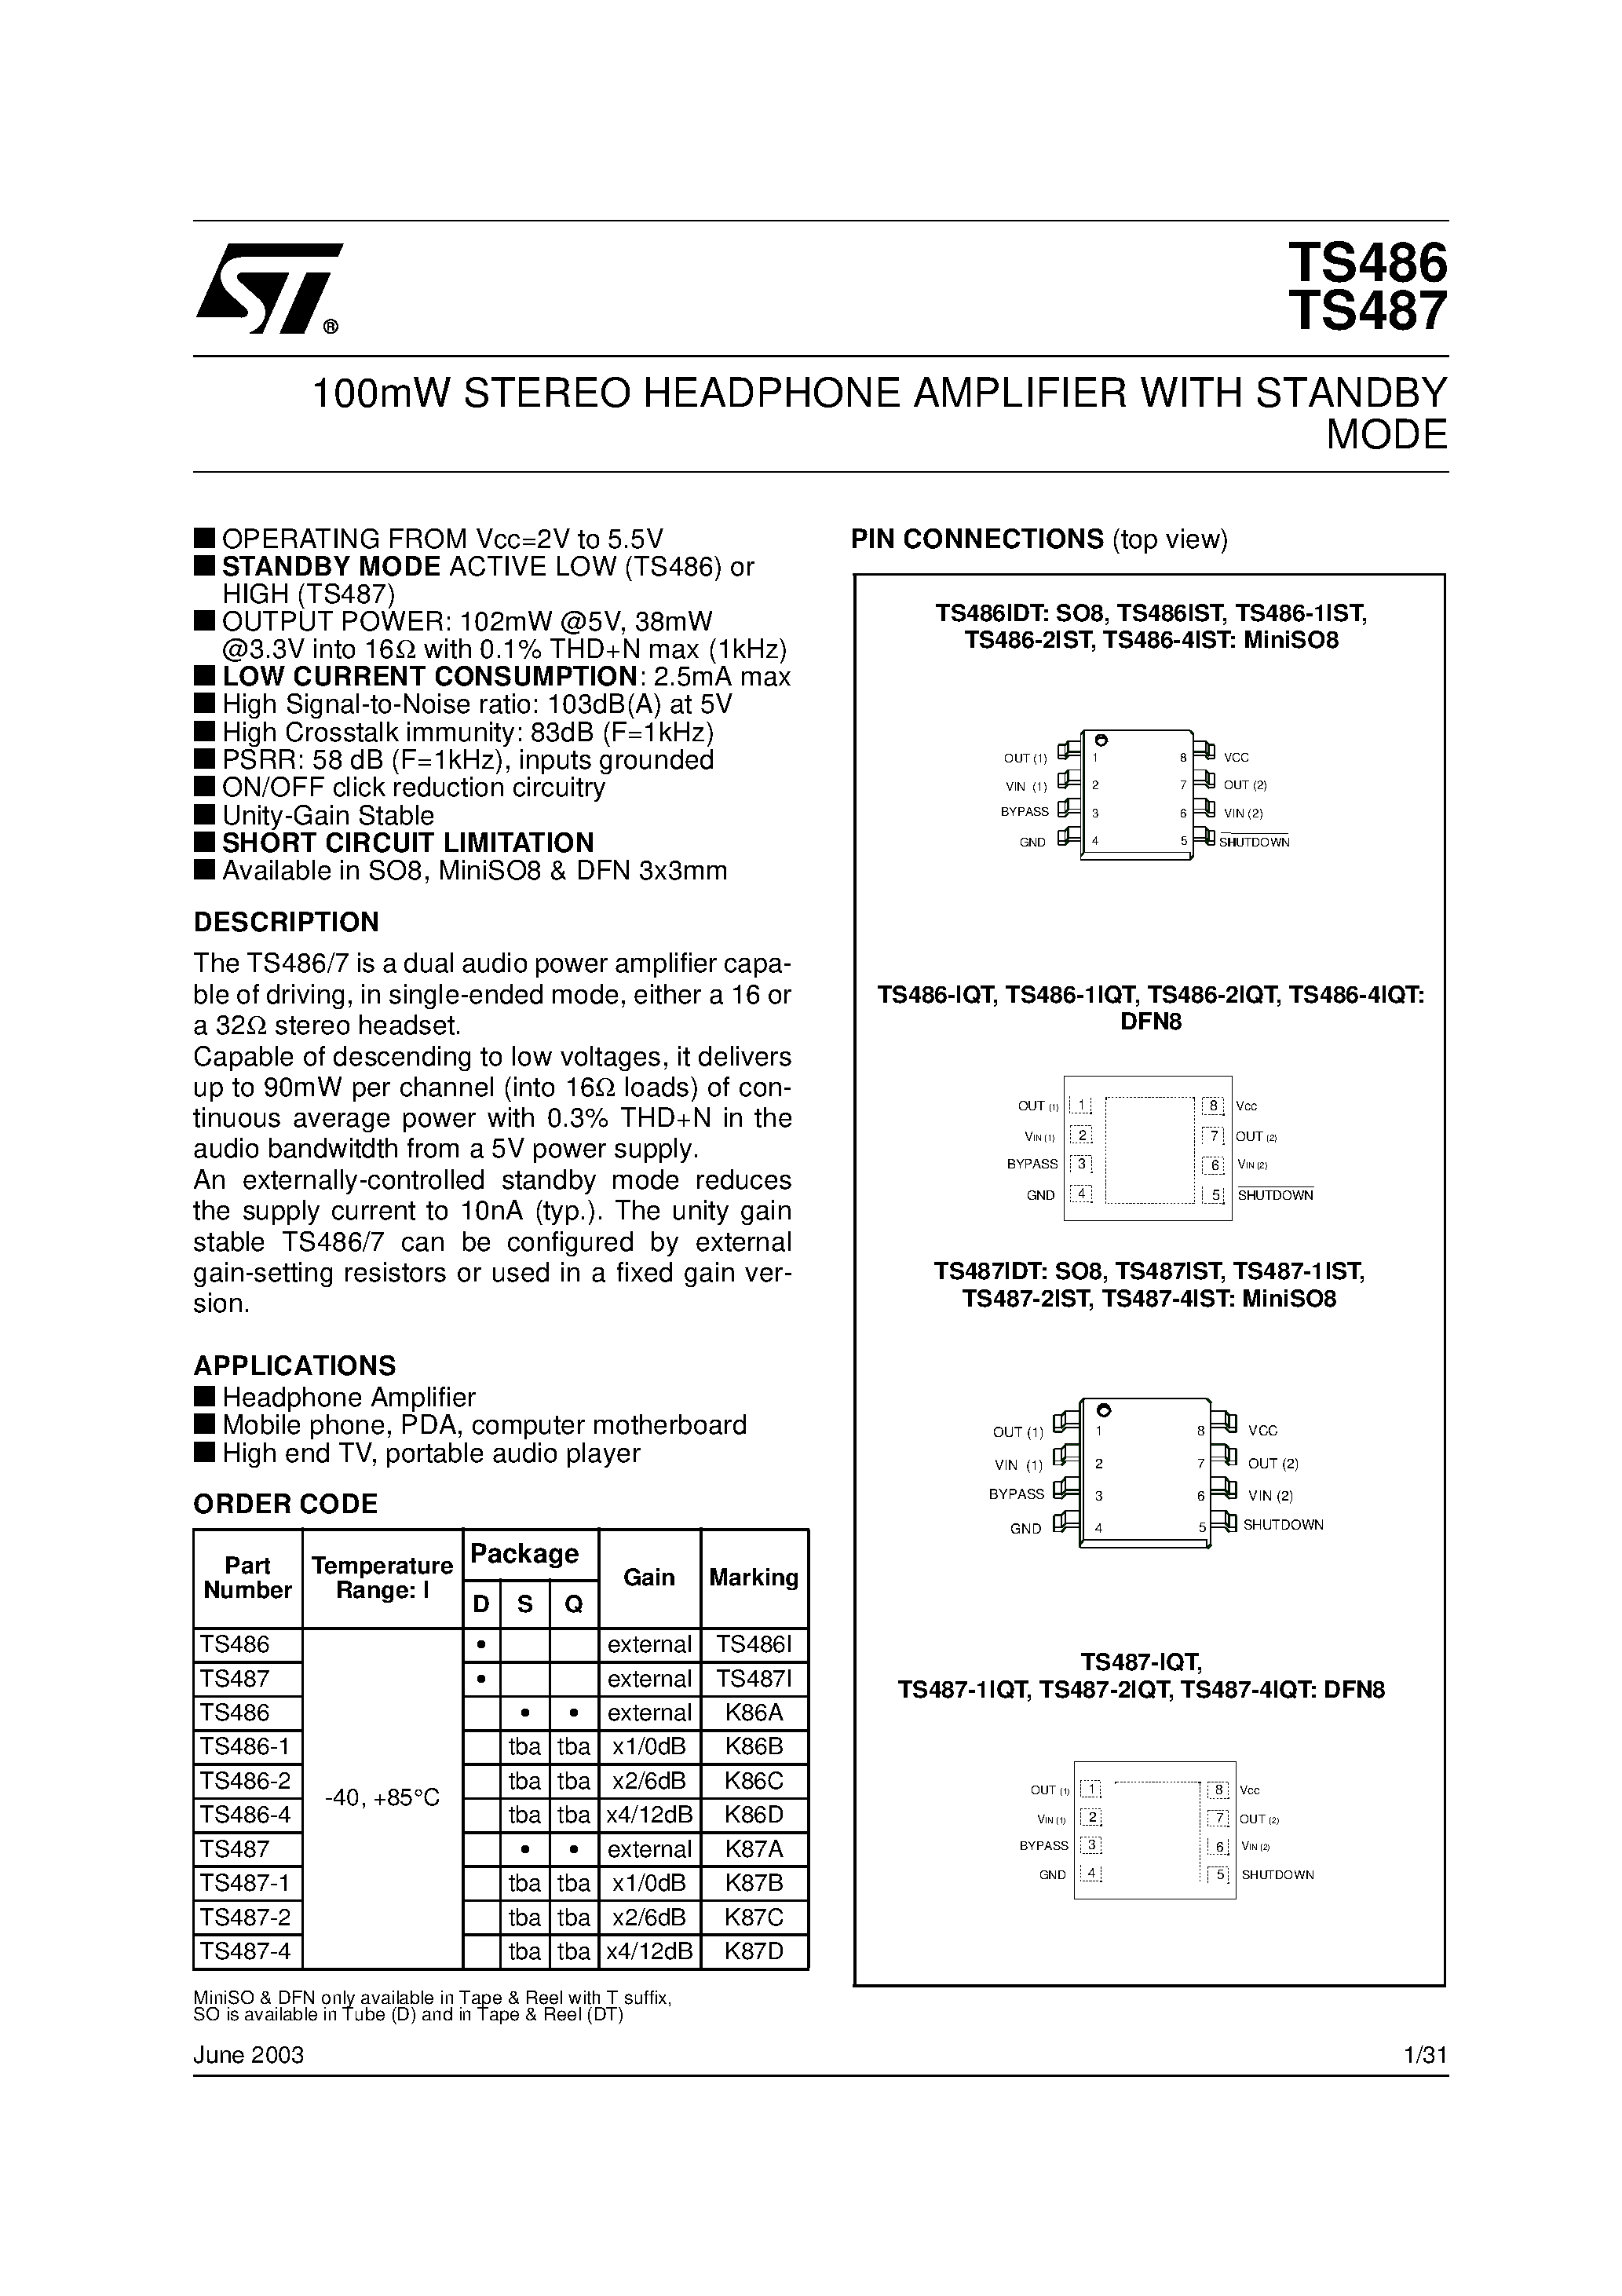 Datasheet TS486 - 100mW STEREO HEADPHONE AMPLIFIER WITH STANDBY MODE page 1